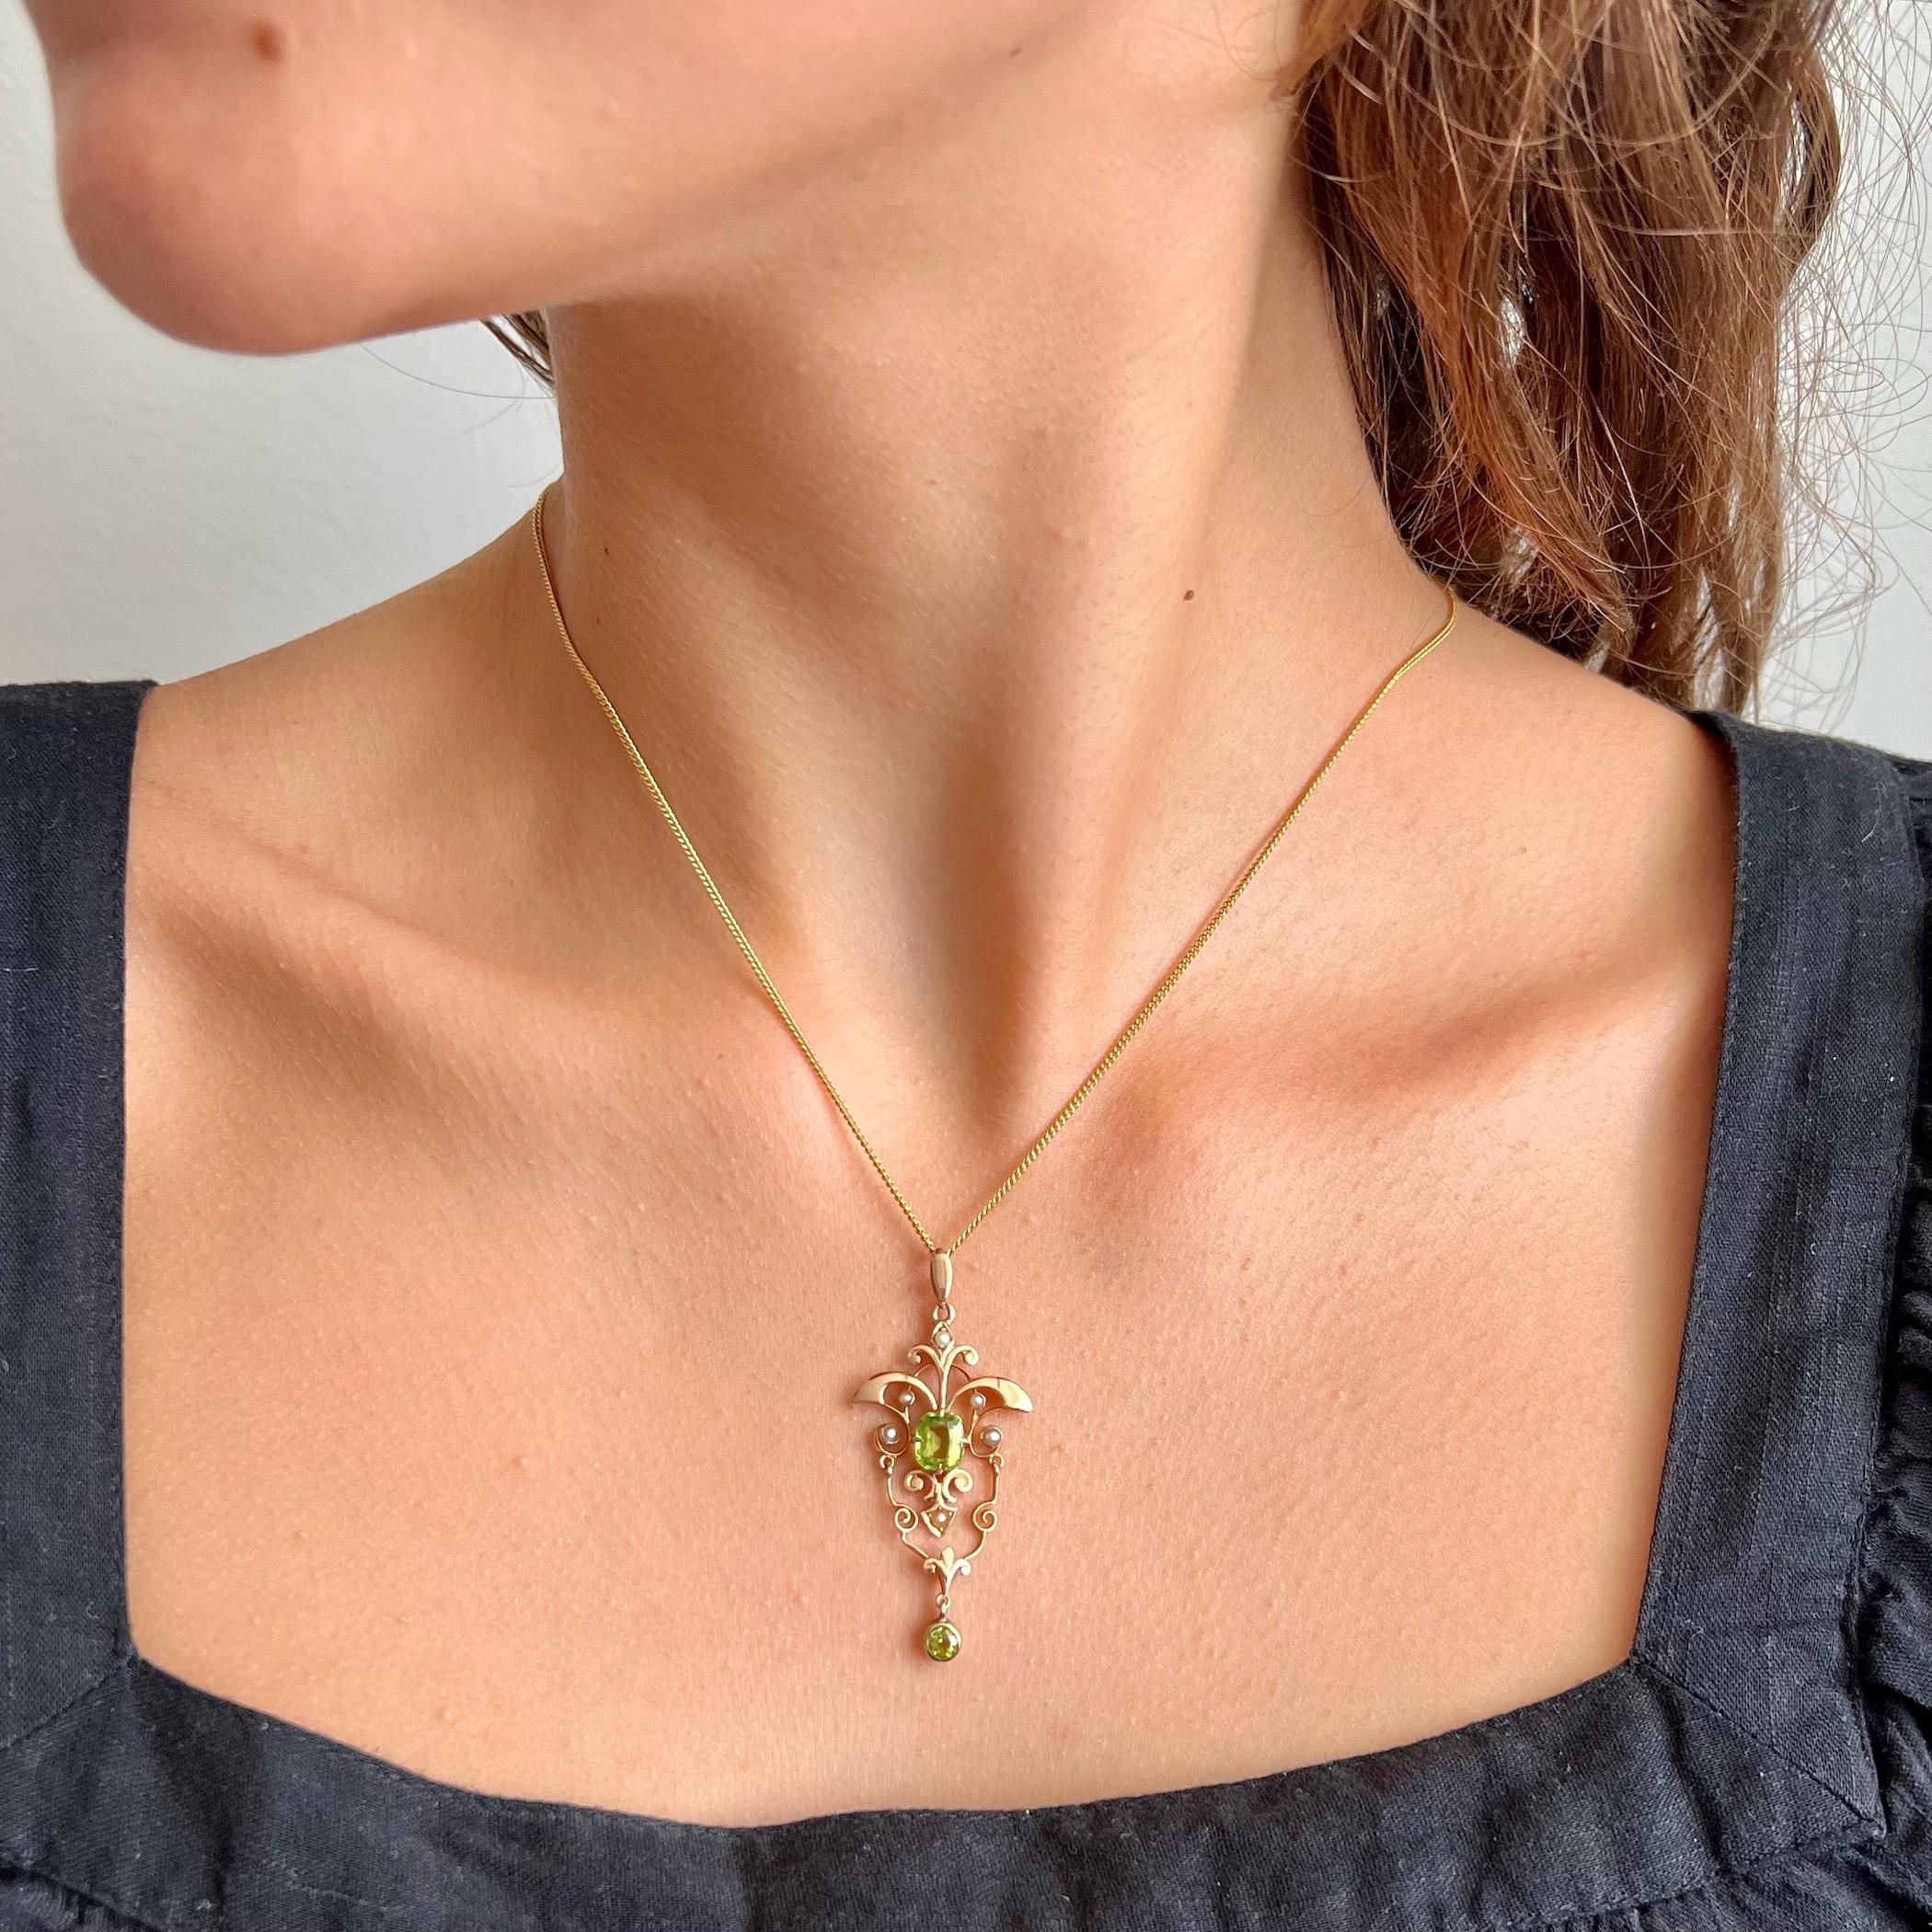 An antique Art Nouveau gold peridot and pearl pendant. This delicate Art Nouveau pendant is made of 14 karat rose gold and set with two fabulous lime green faceted fancy cut peridot gemstones. The pendant consists of a larger square peridot gemstone